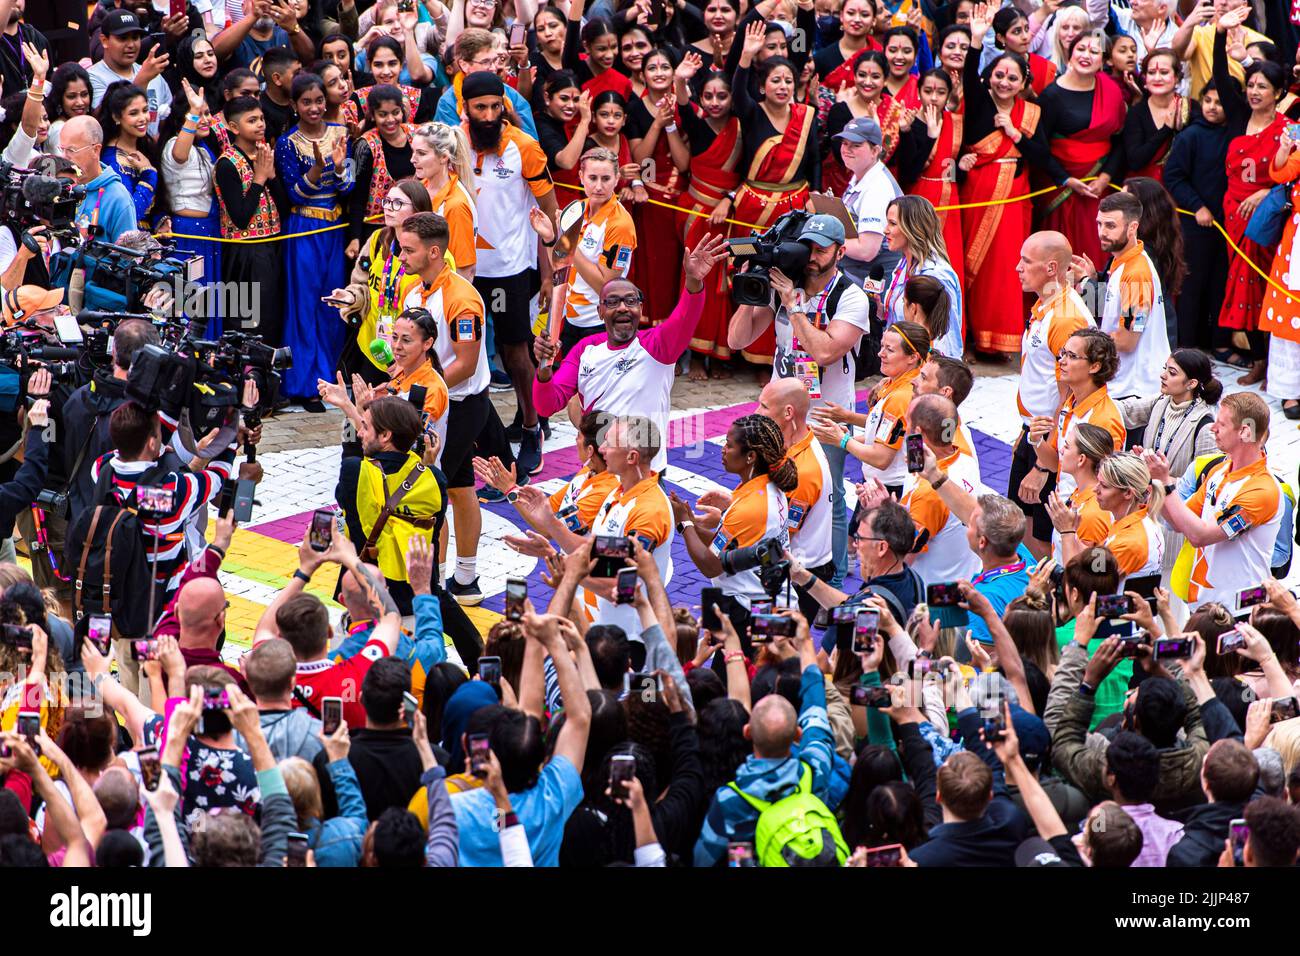 BIRMINGHAM, UNITED KINGDOM. 27th Jul, 2022. Variety artists perform during The Queen's Baton Relay homecoming event of Birmingham 2022 - Commonwealth Games at Victoria Square on Wednesday, July 27, 2022 in BIRMINGHAM, UNITED KINGDOM. Credit: Taka G Wu/Alamy Live News Stock Photo